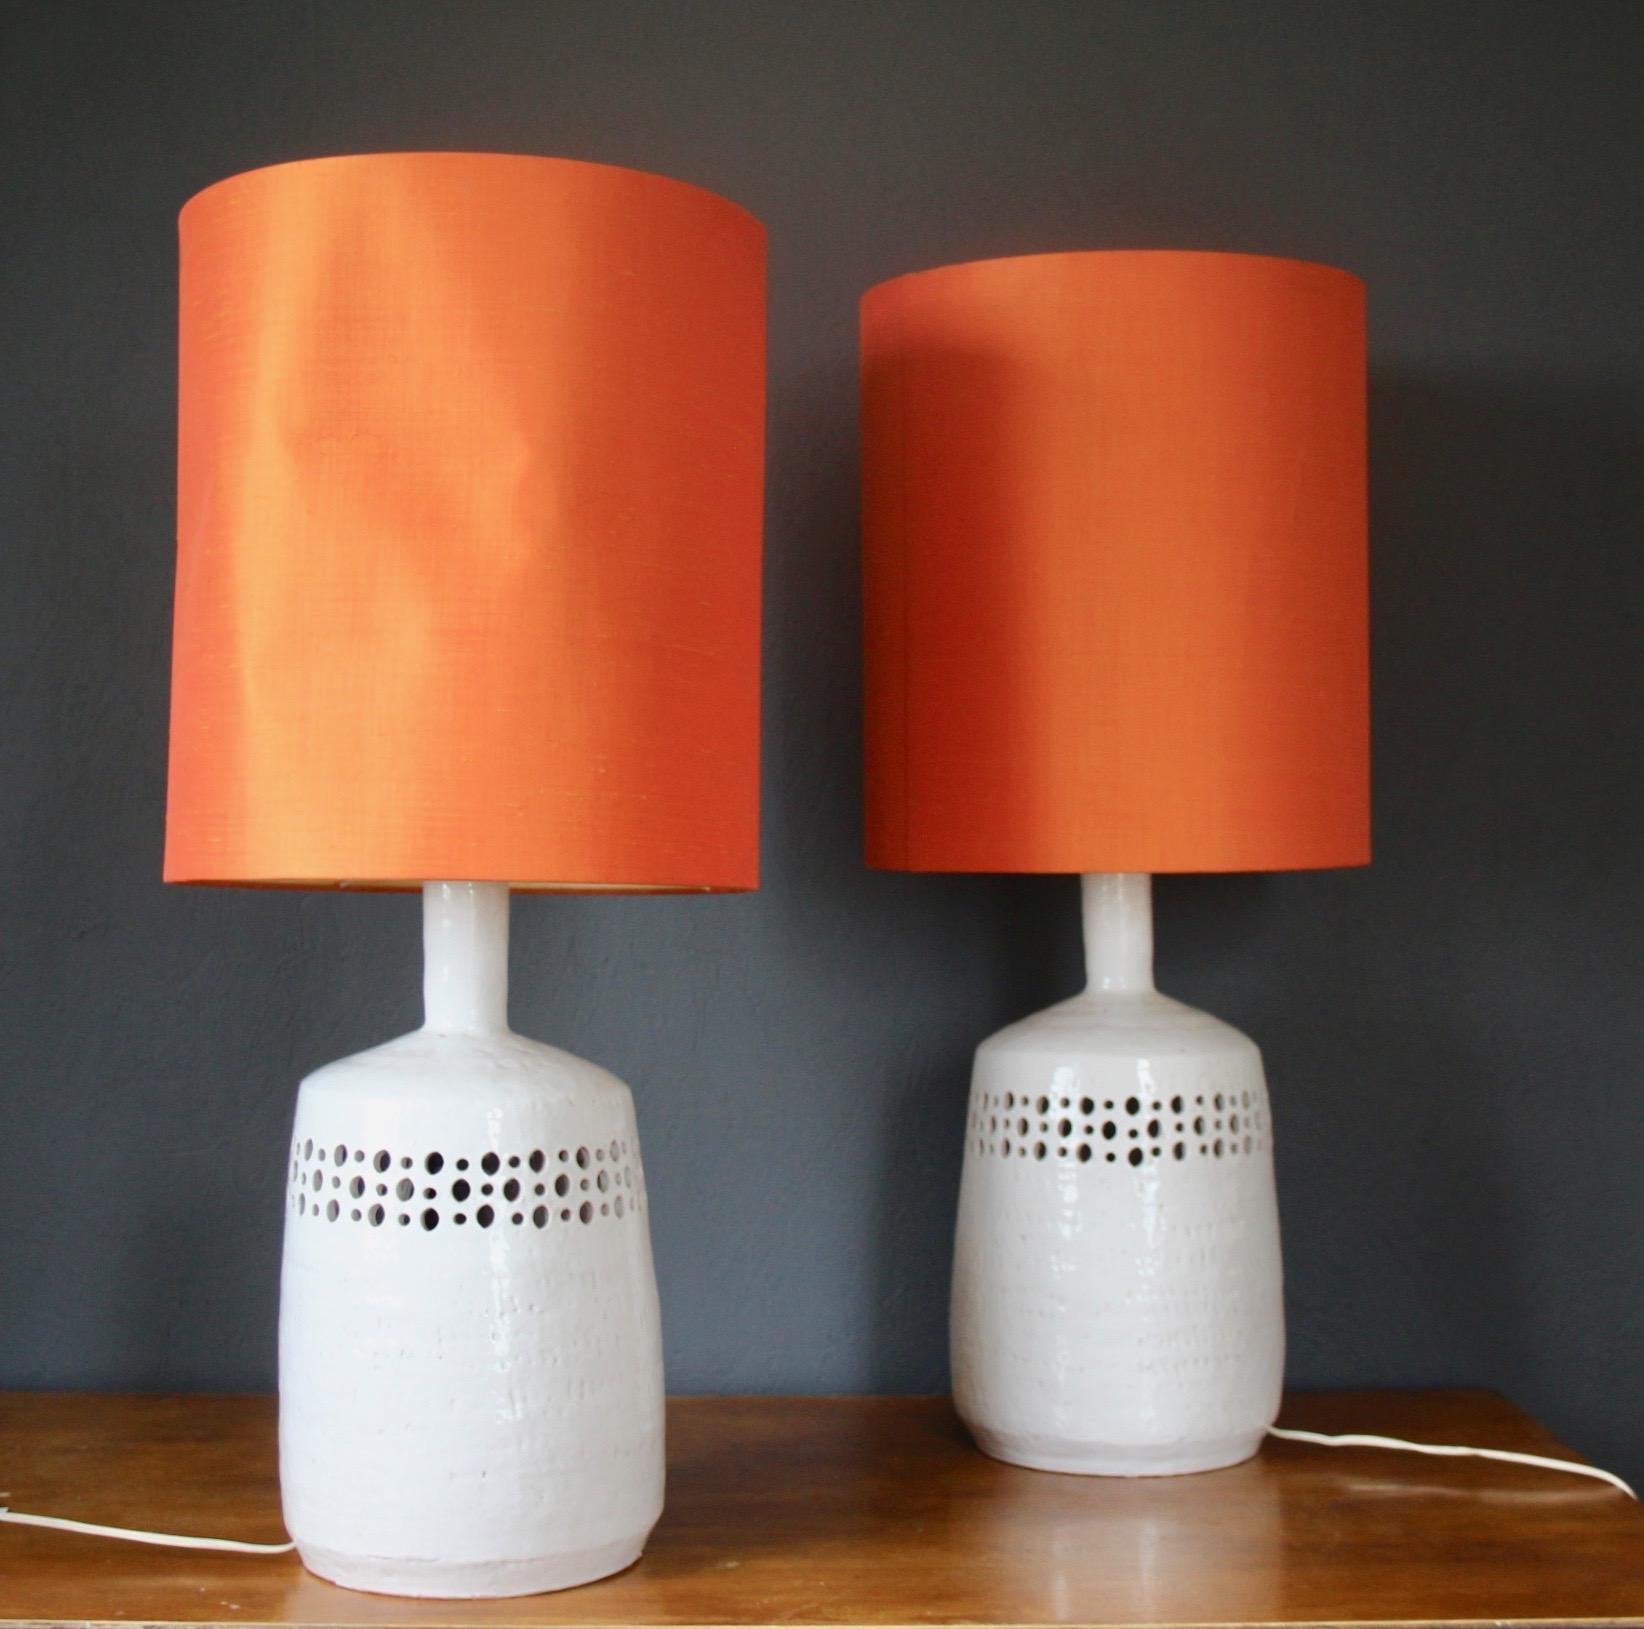 White pair of ceramic table lamp one of shade are used see photo.